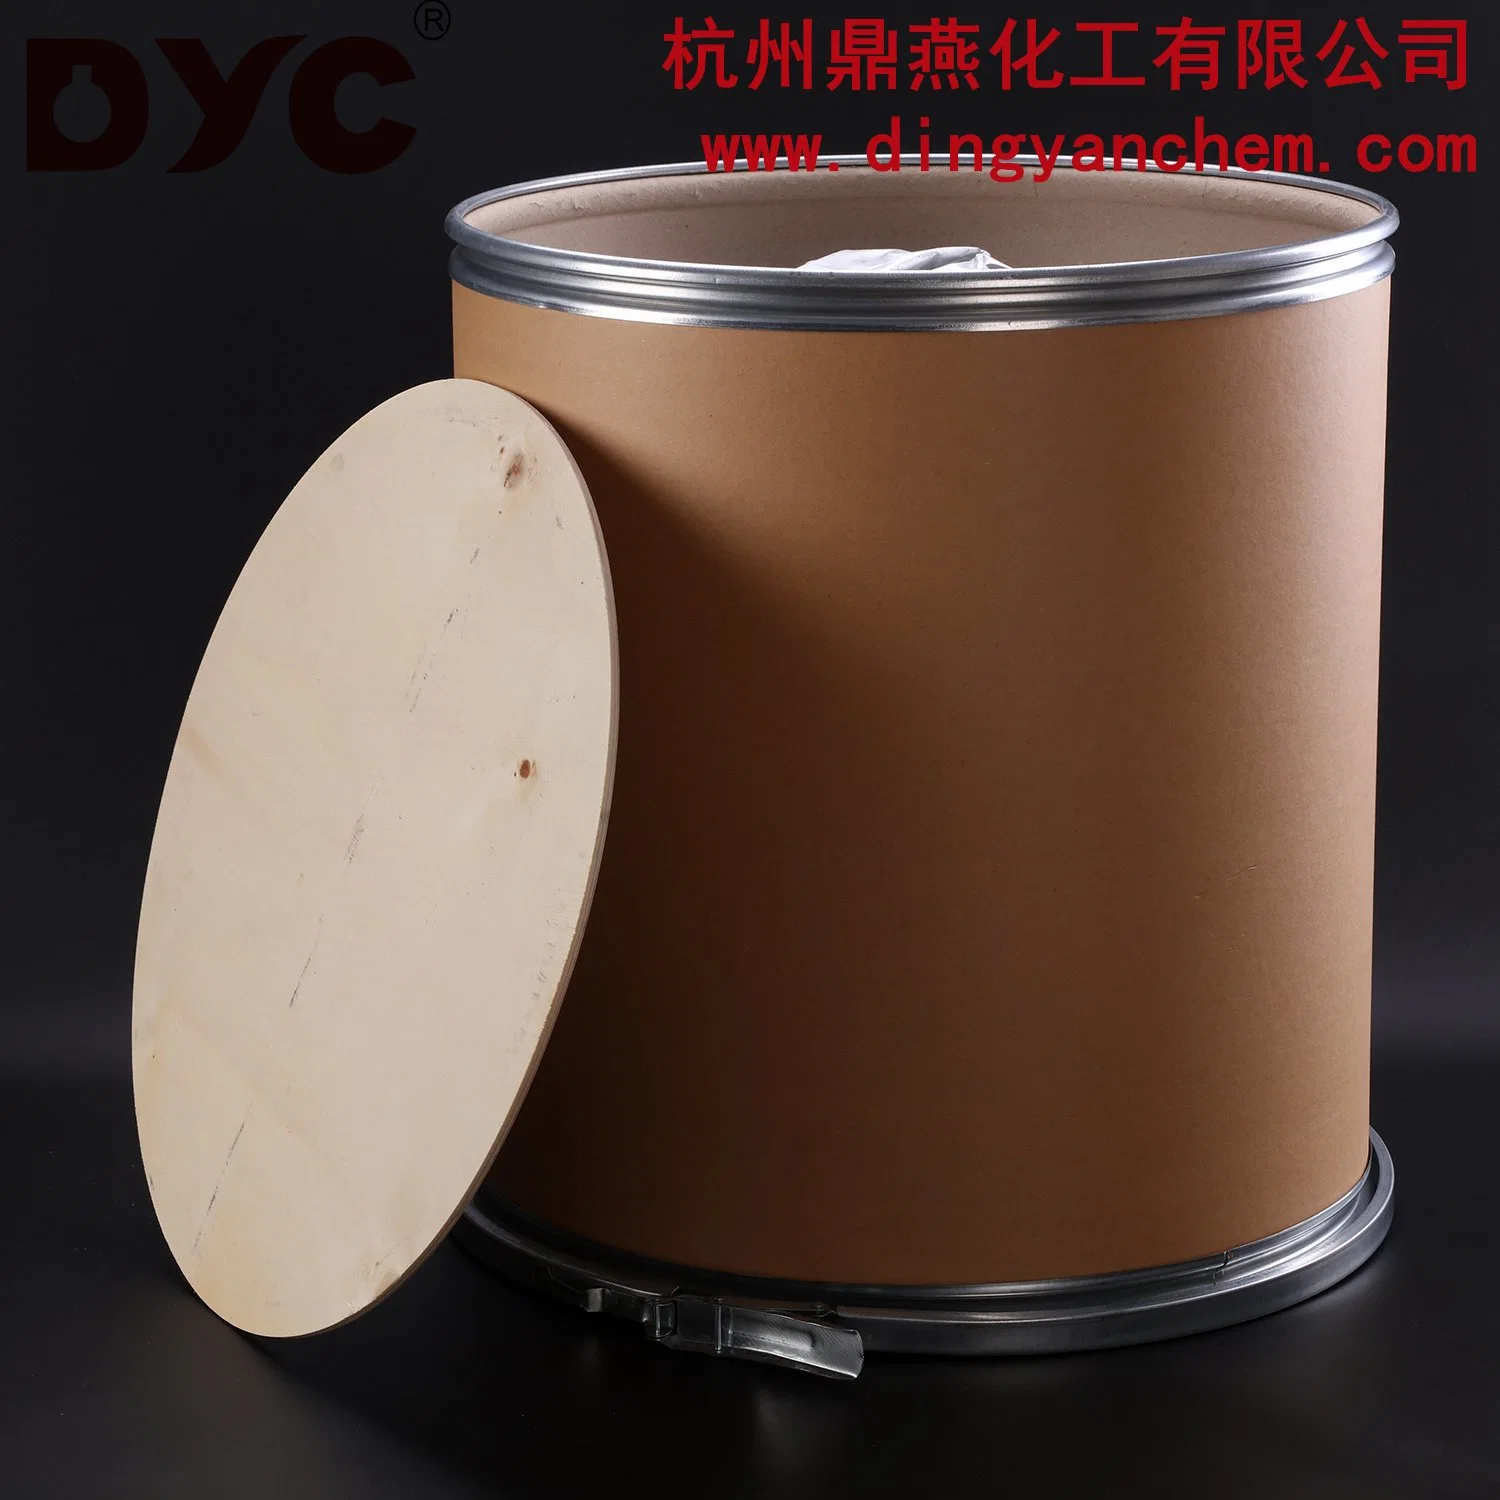 Daily Raw Material Medicine Collagen Hydrolyzates Purity Degree 99% CAS No. 92113-31-0